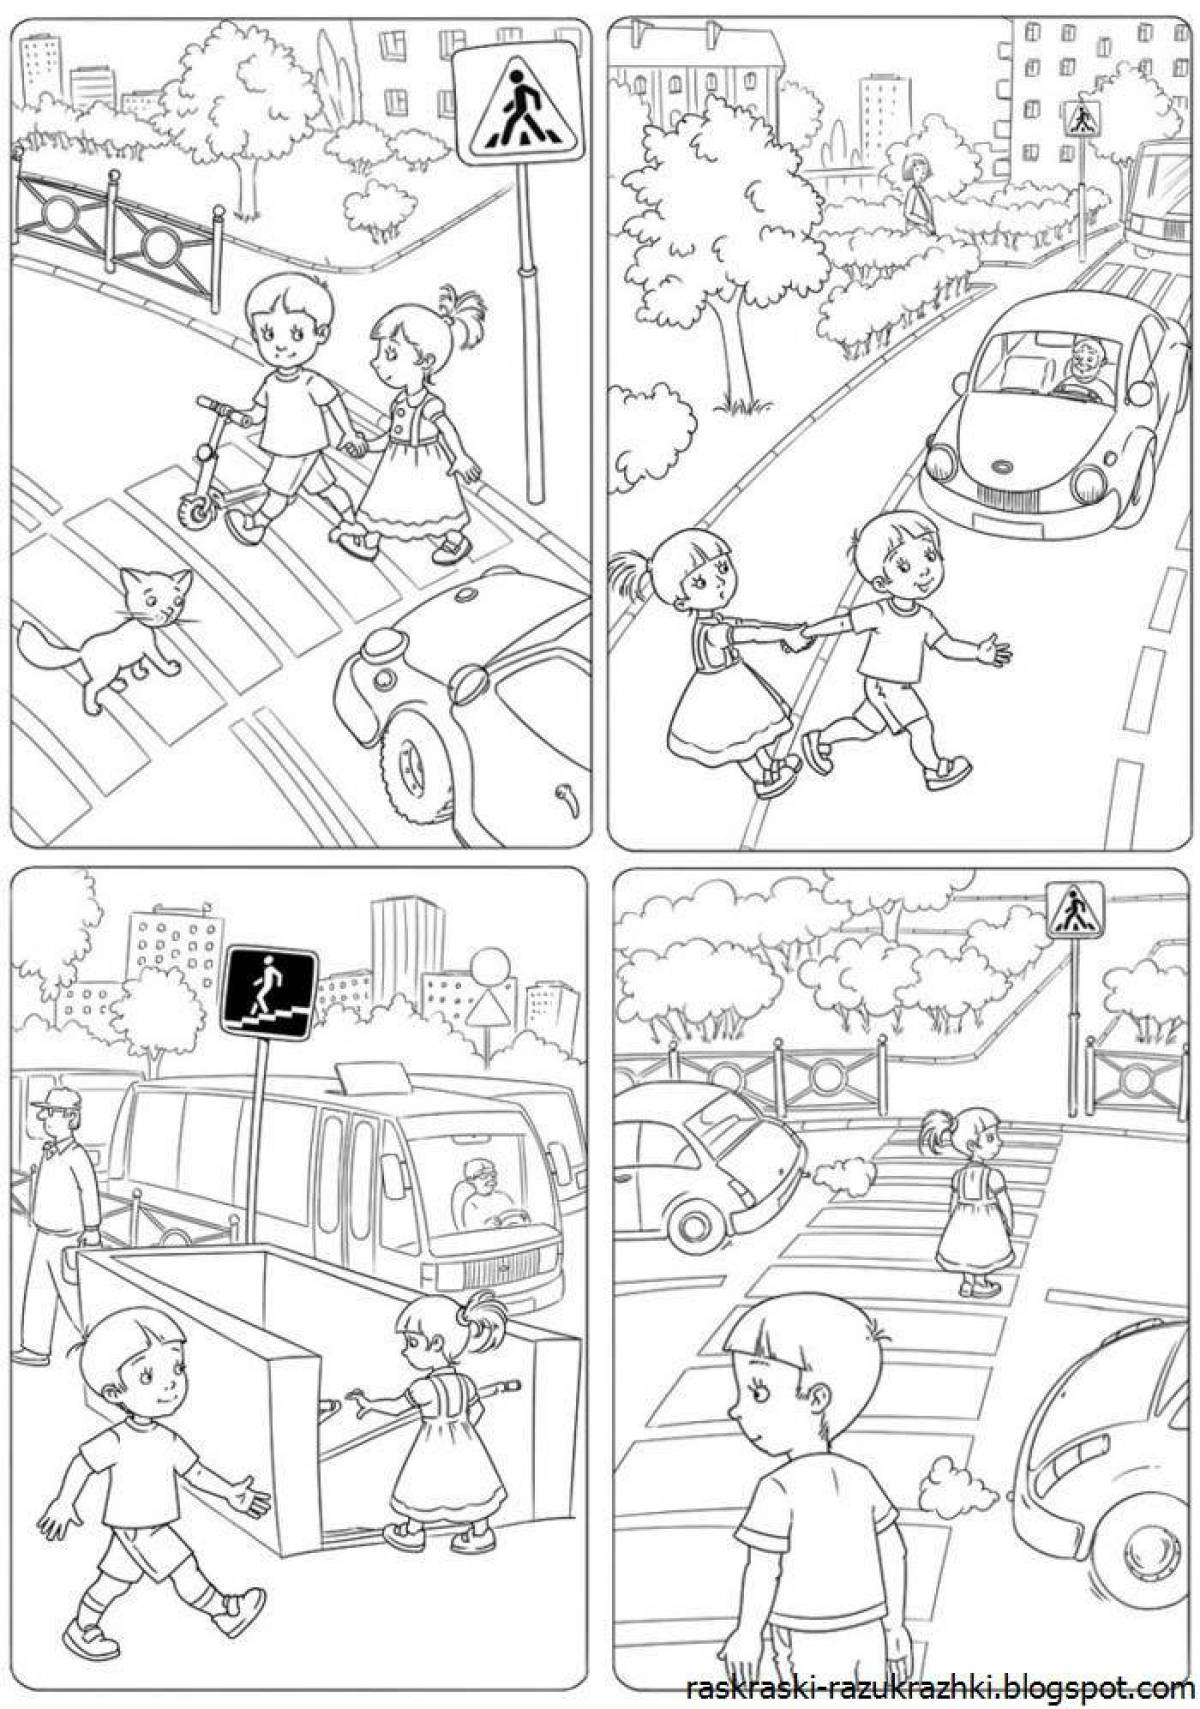 According to traffic rules for preschoolers #10